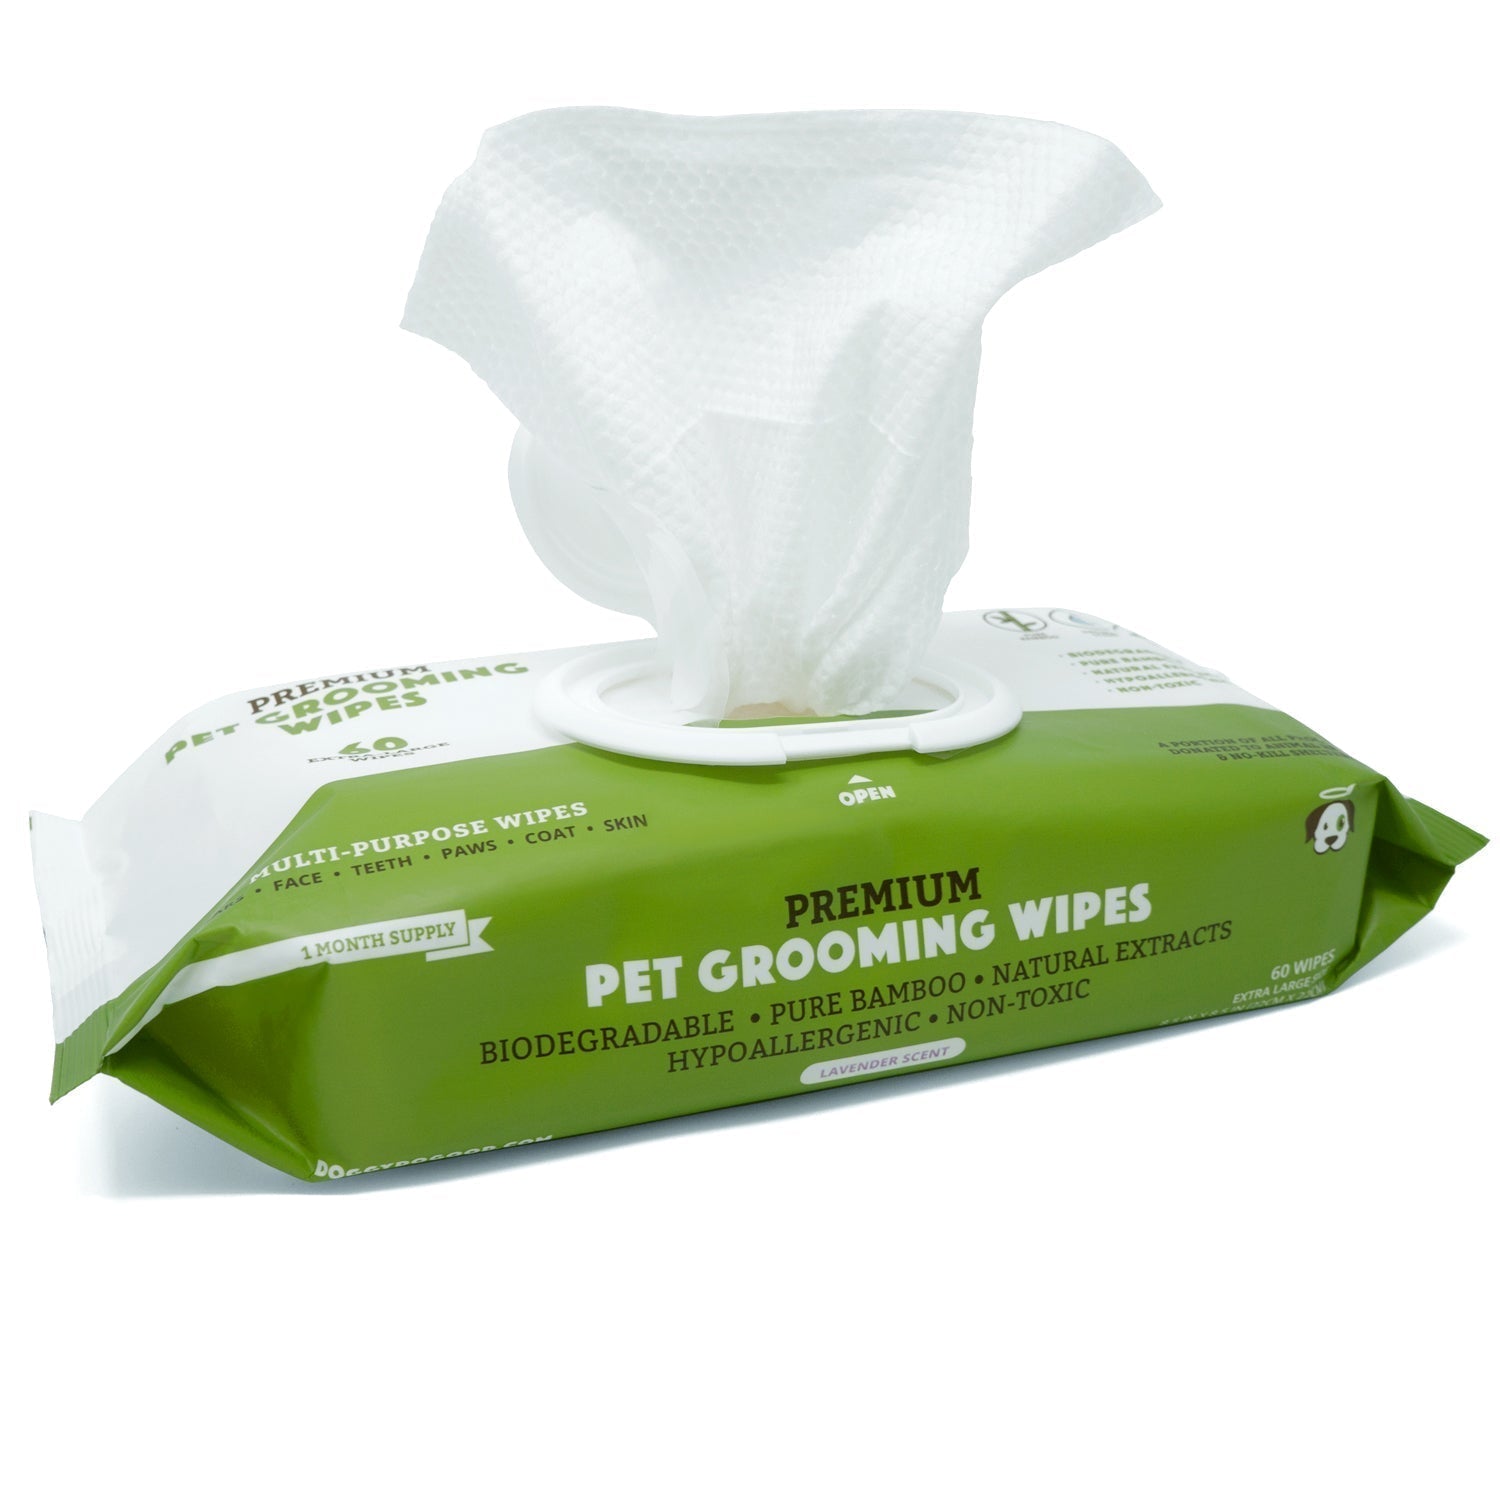 Biodegradable Grooming Wipes - Lavender Scent (60 Count)